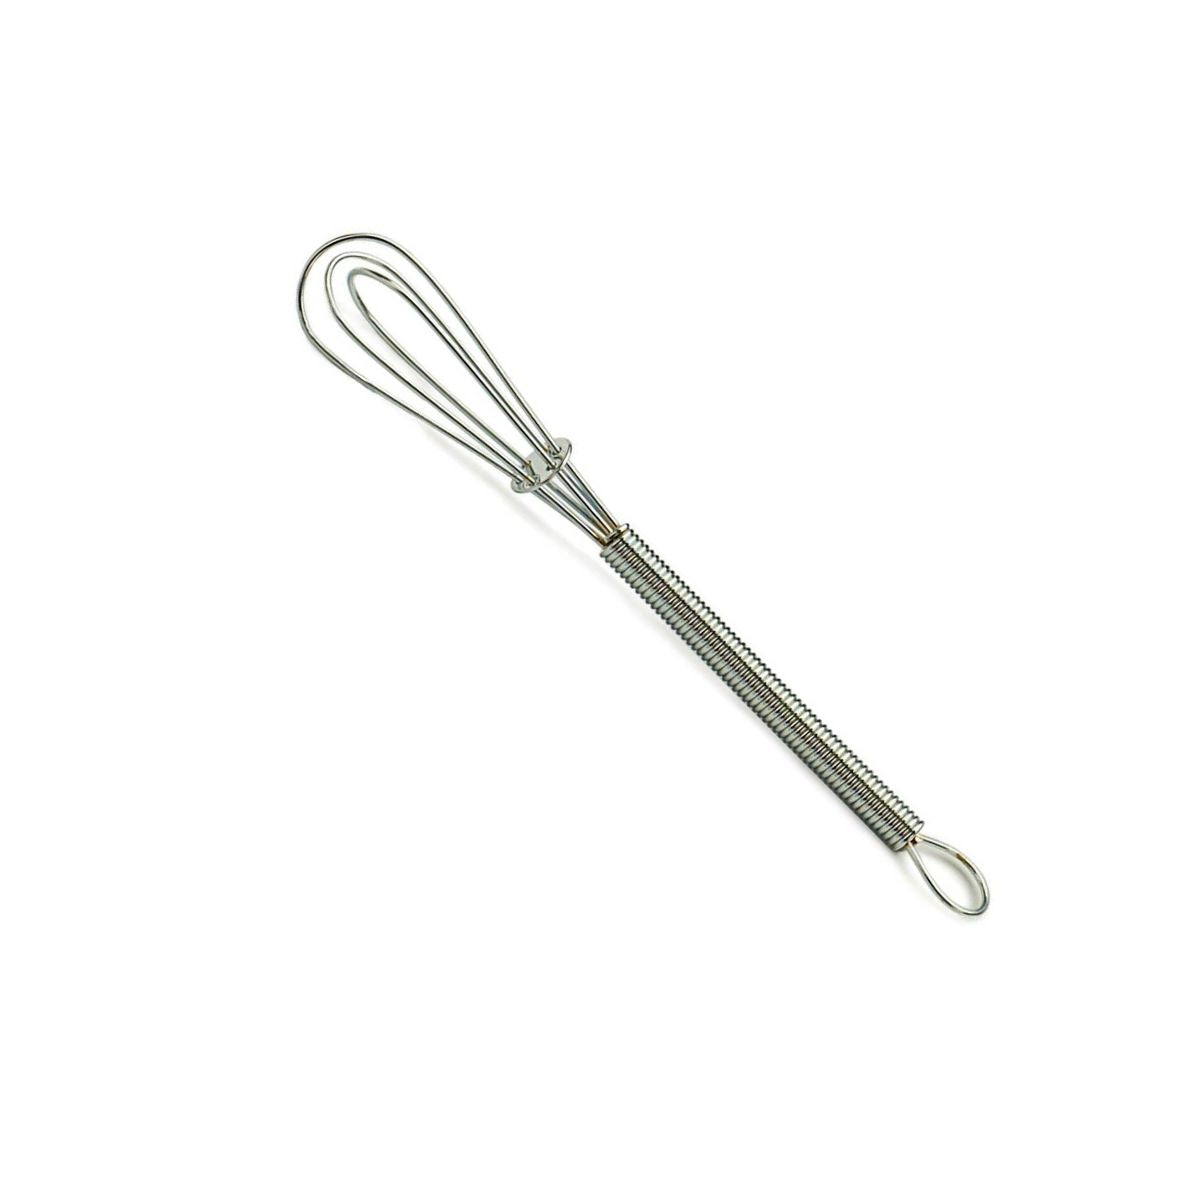 Mini Whisk, 5 Inch long handle whisk